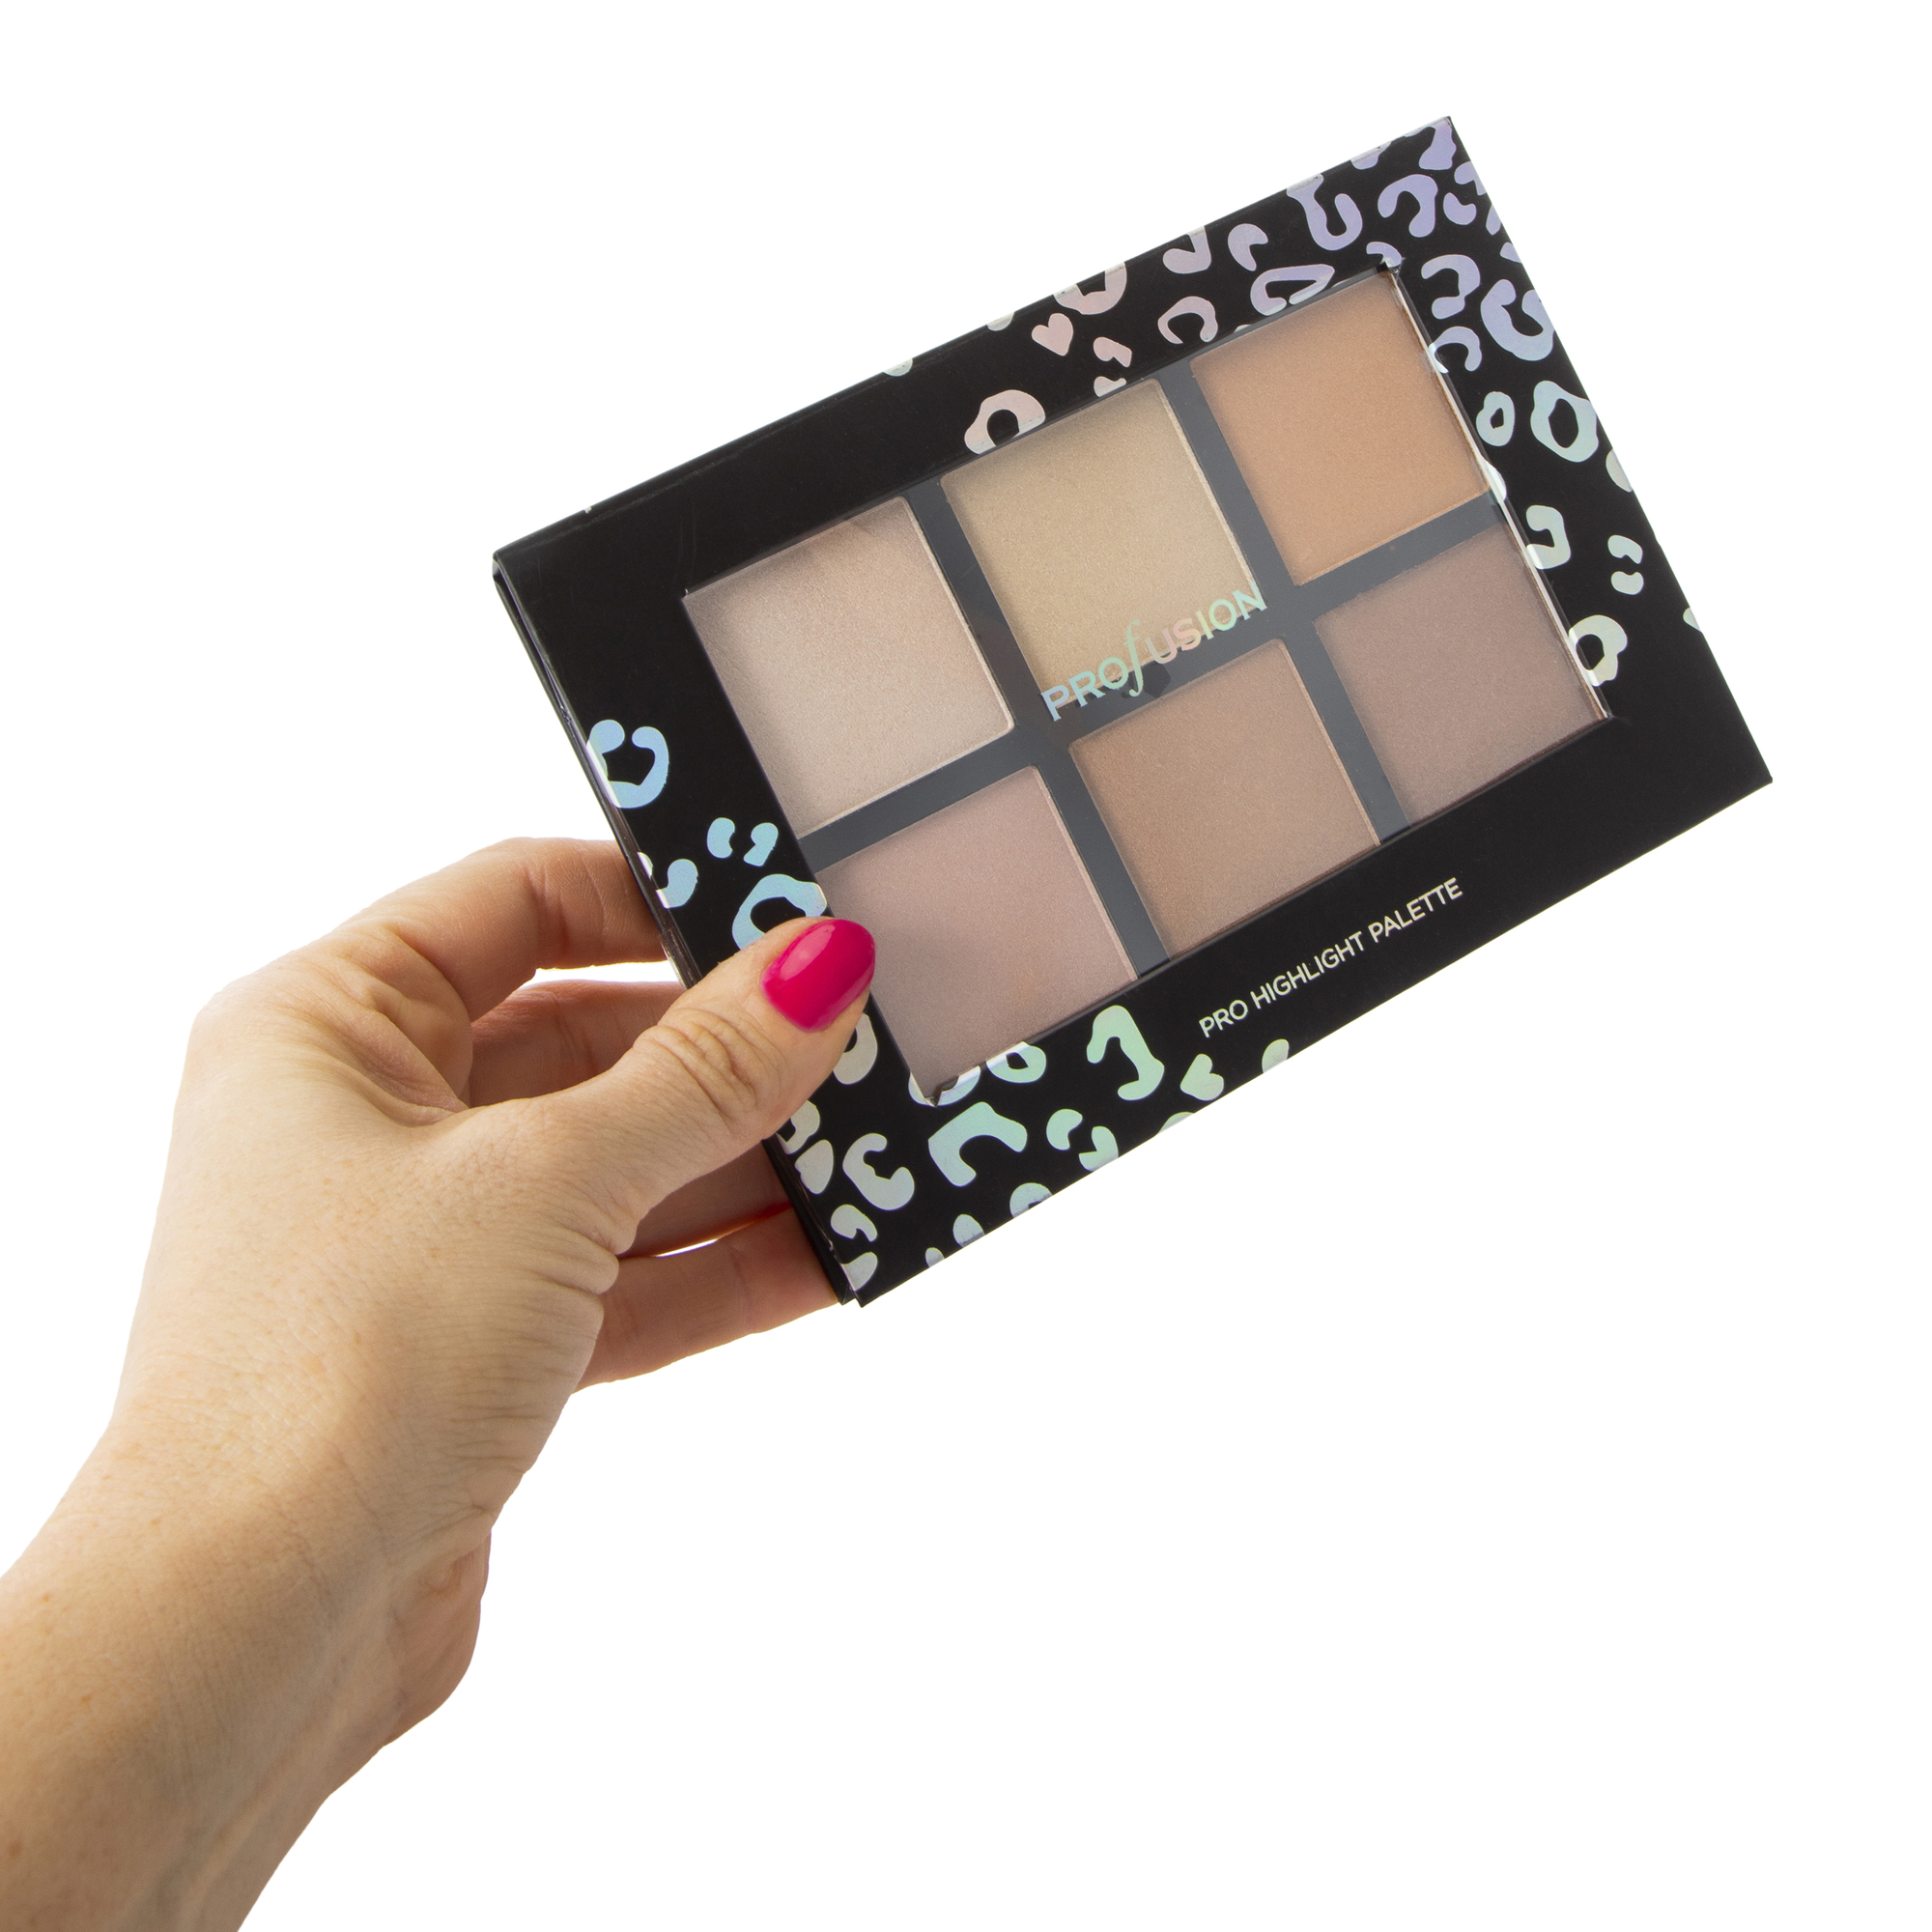 profusion highlighter palette 6-piece